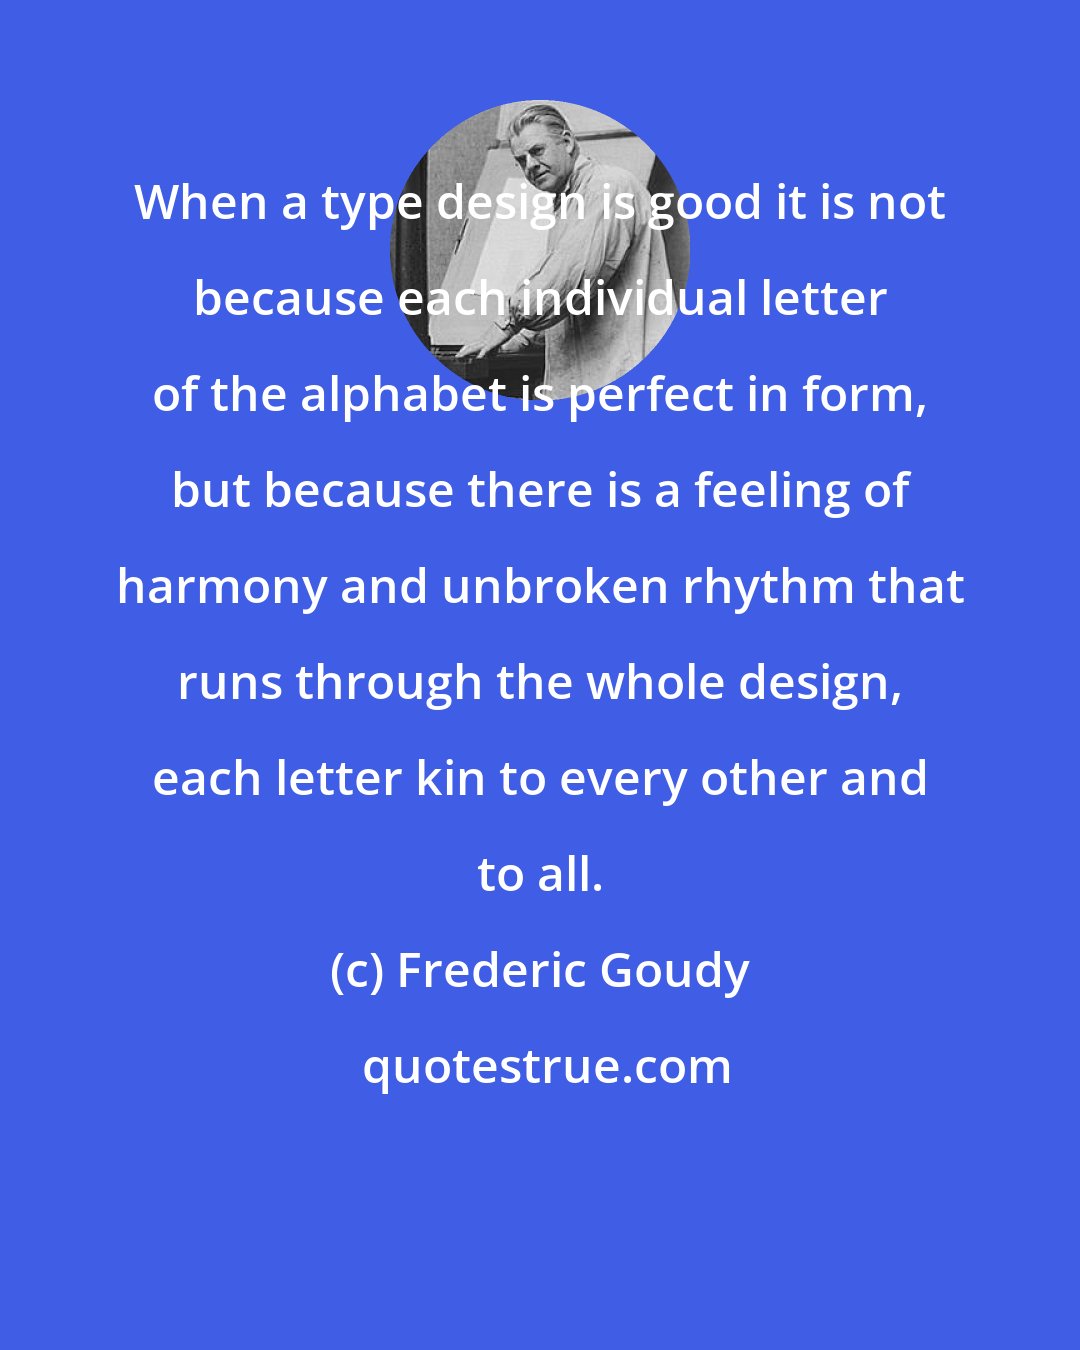 Frederic Goudy: When a type design is good it is not because each individual letter of the alphabet is perfect in form, but because there is a feeling of harmony and unbroken rhythm that runs through the whole design, each letter kin to every other and to all.